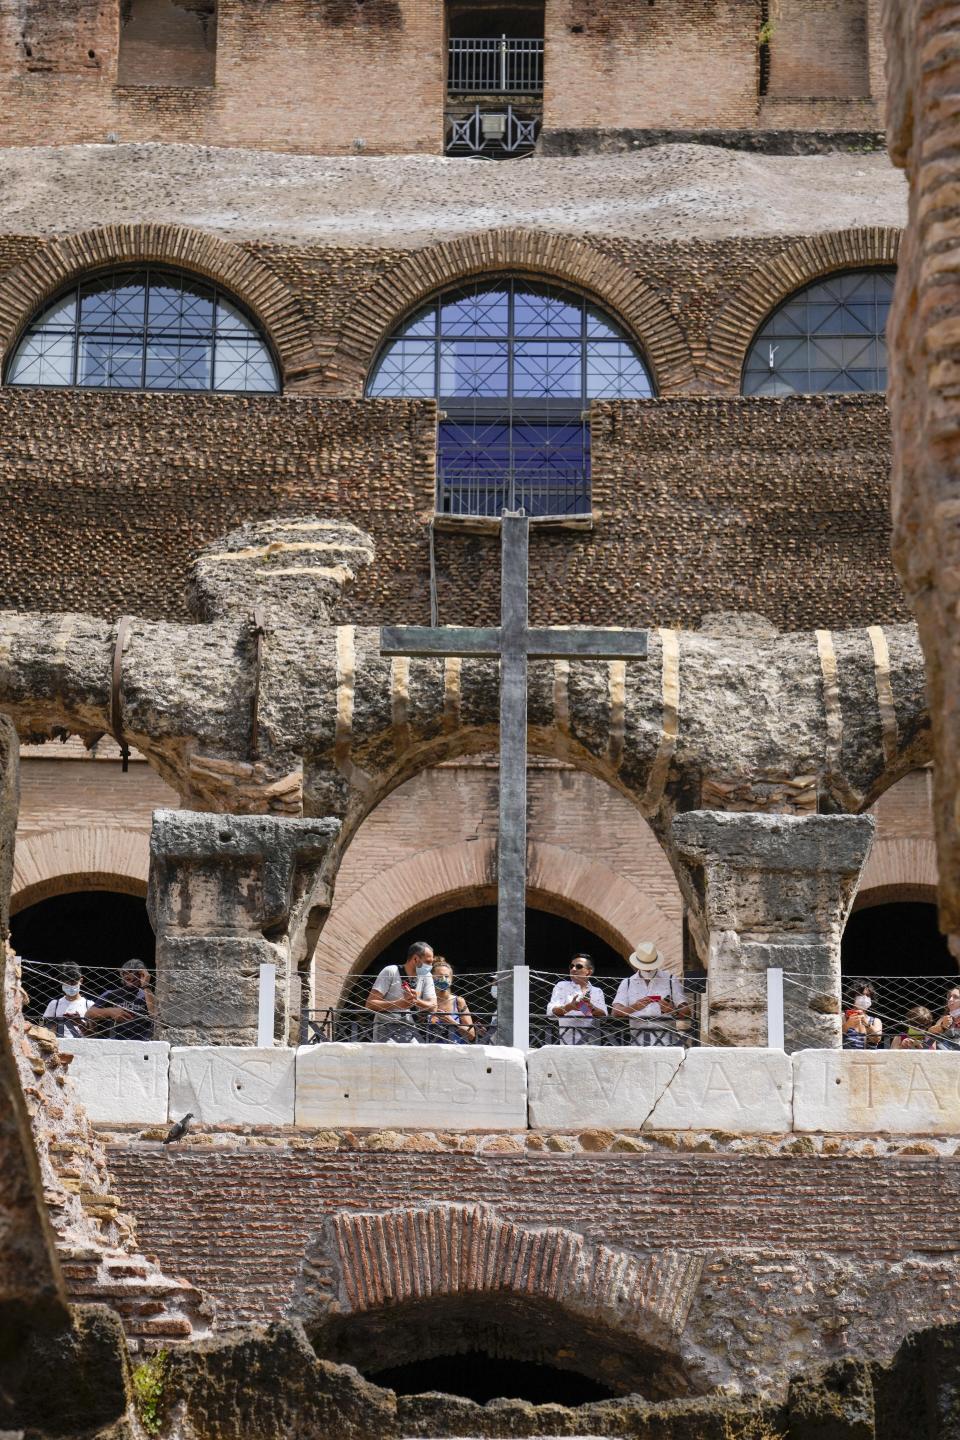 Visitors admire the newly restored lower level of the Colosseum during an event for the media, in Rome, Friday, June 25, 2021. After 2-and-1/2 years of work to shore up the Colosseum’s underground passages, tourists will be able to go down and wander through part of what what had been the ancient arena’s “backstage.” (AP Photo/Andrew Medichini)